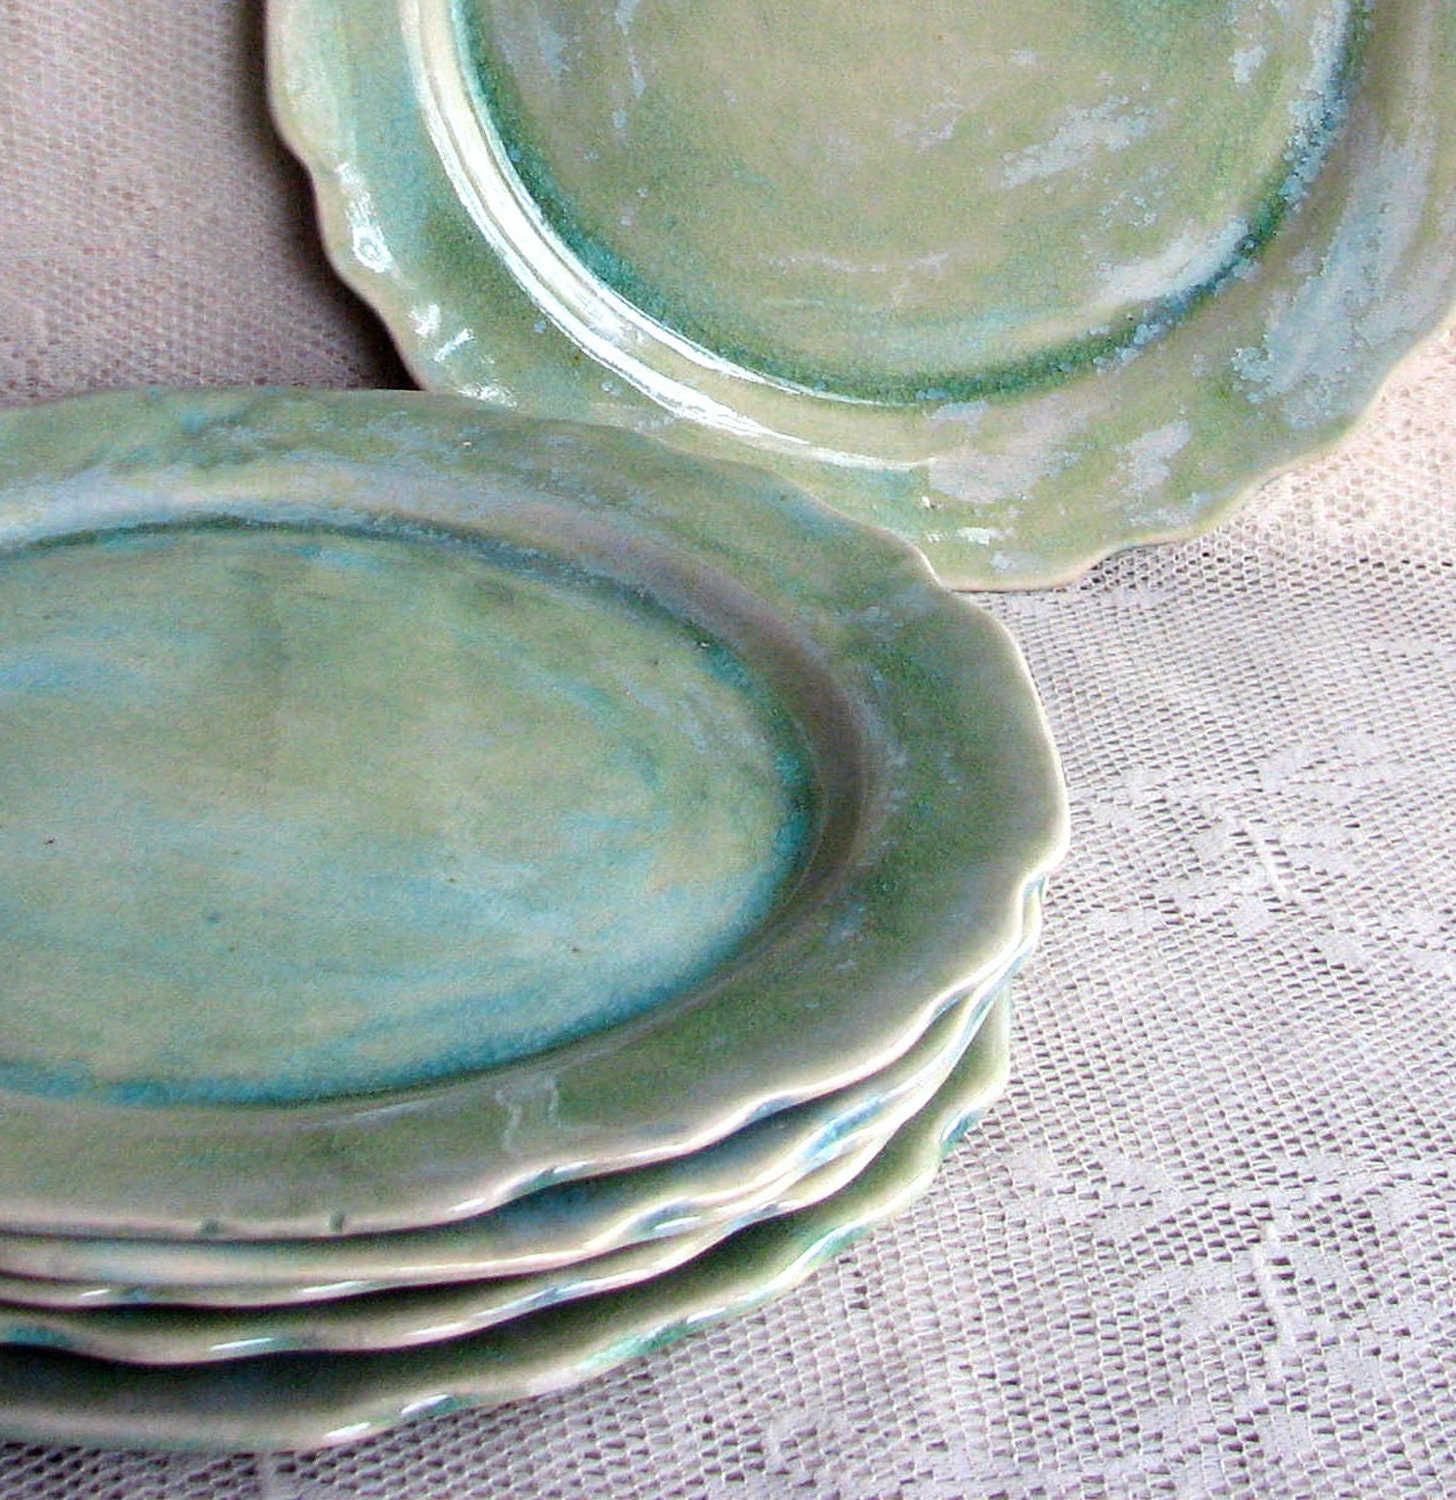 Handmade pottery ceramic stoneware clay slab set of 6 dinner plates with cut edges in light blues - Lesliefreemandesigns